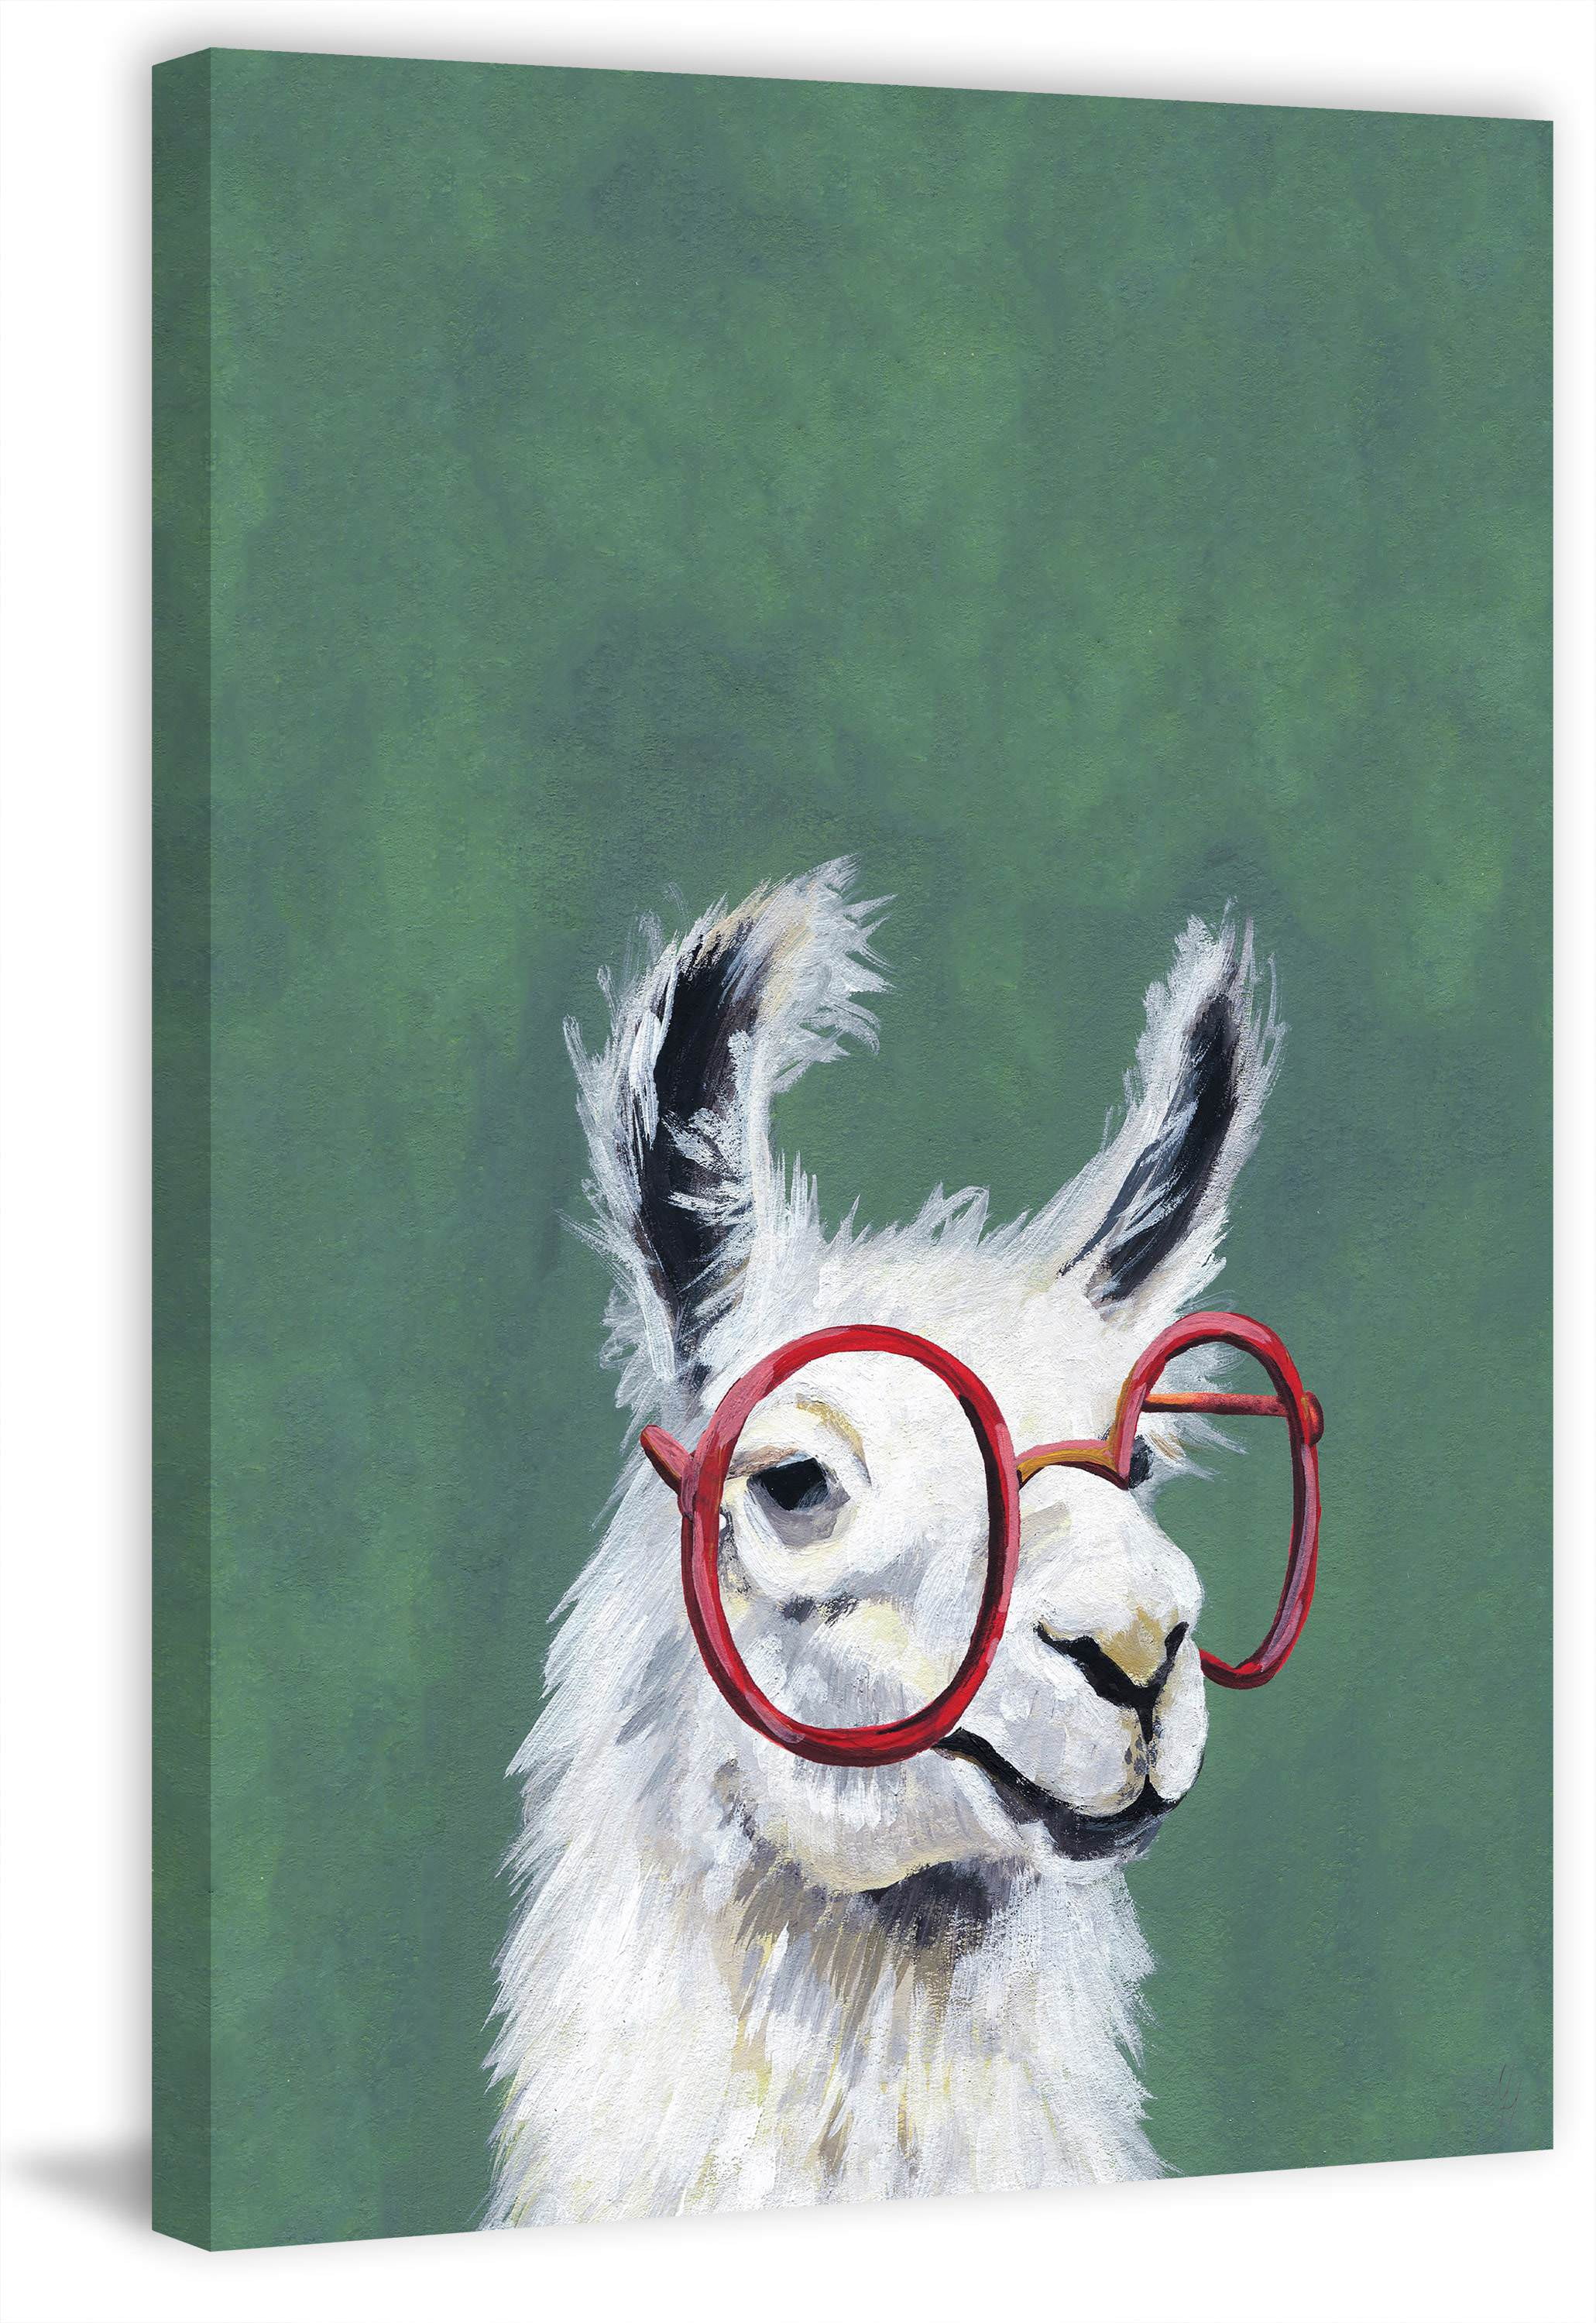 Red Llama Glasses Painting Print on Wrapped Canvas - Walmart.com